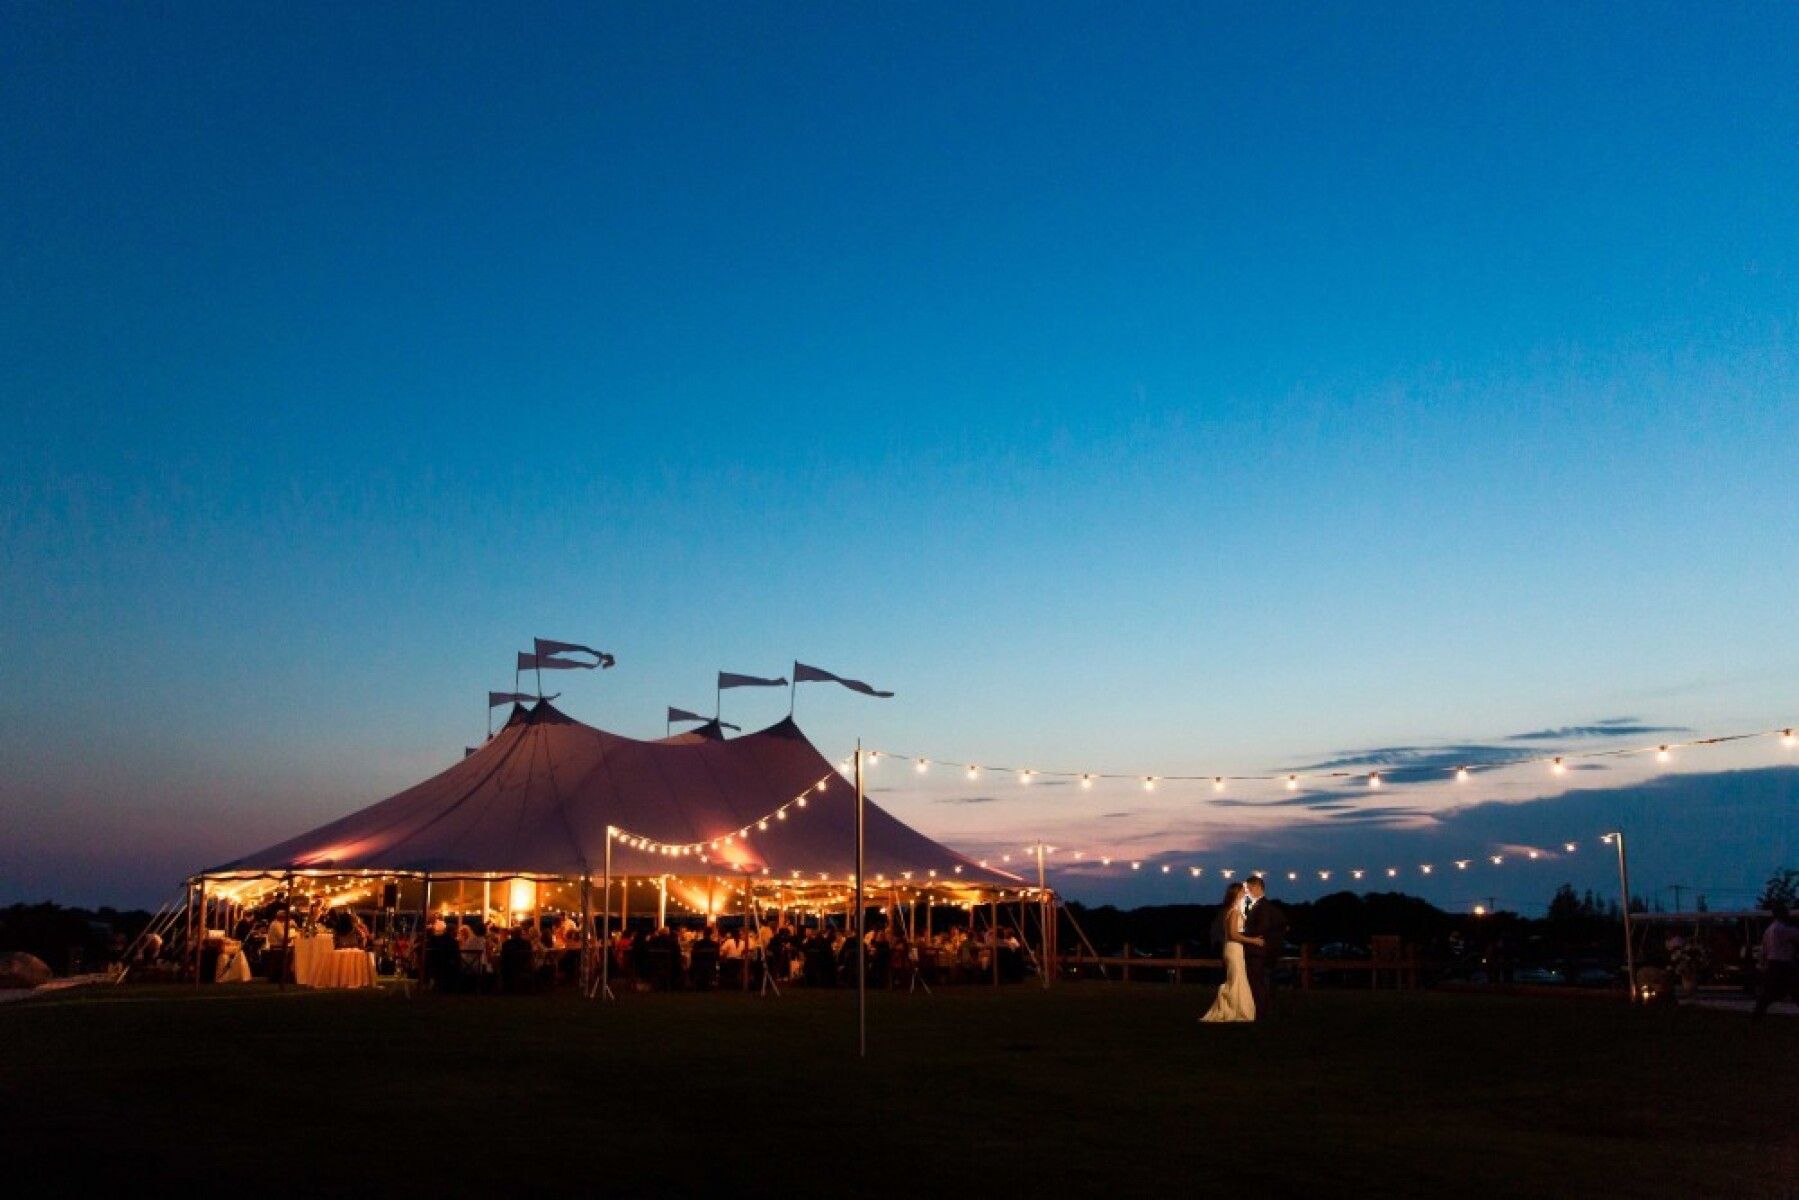 peconic bay yacht club the knot